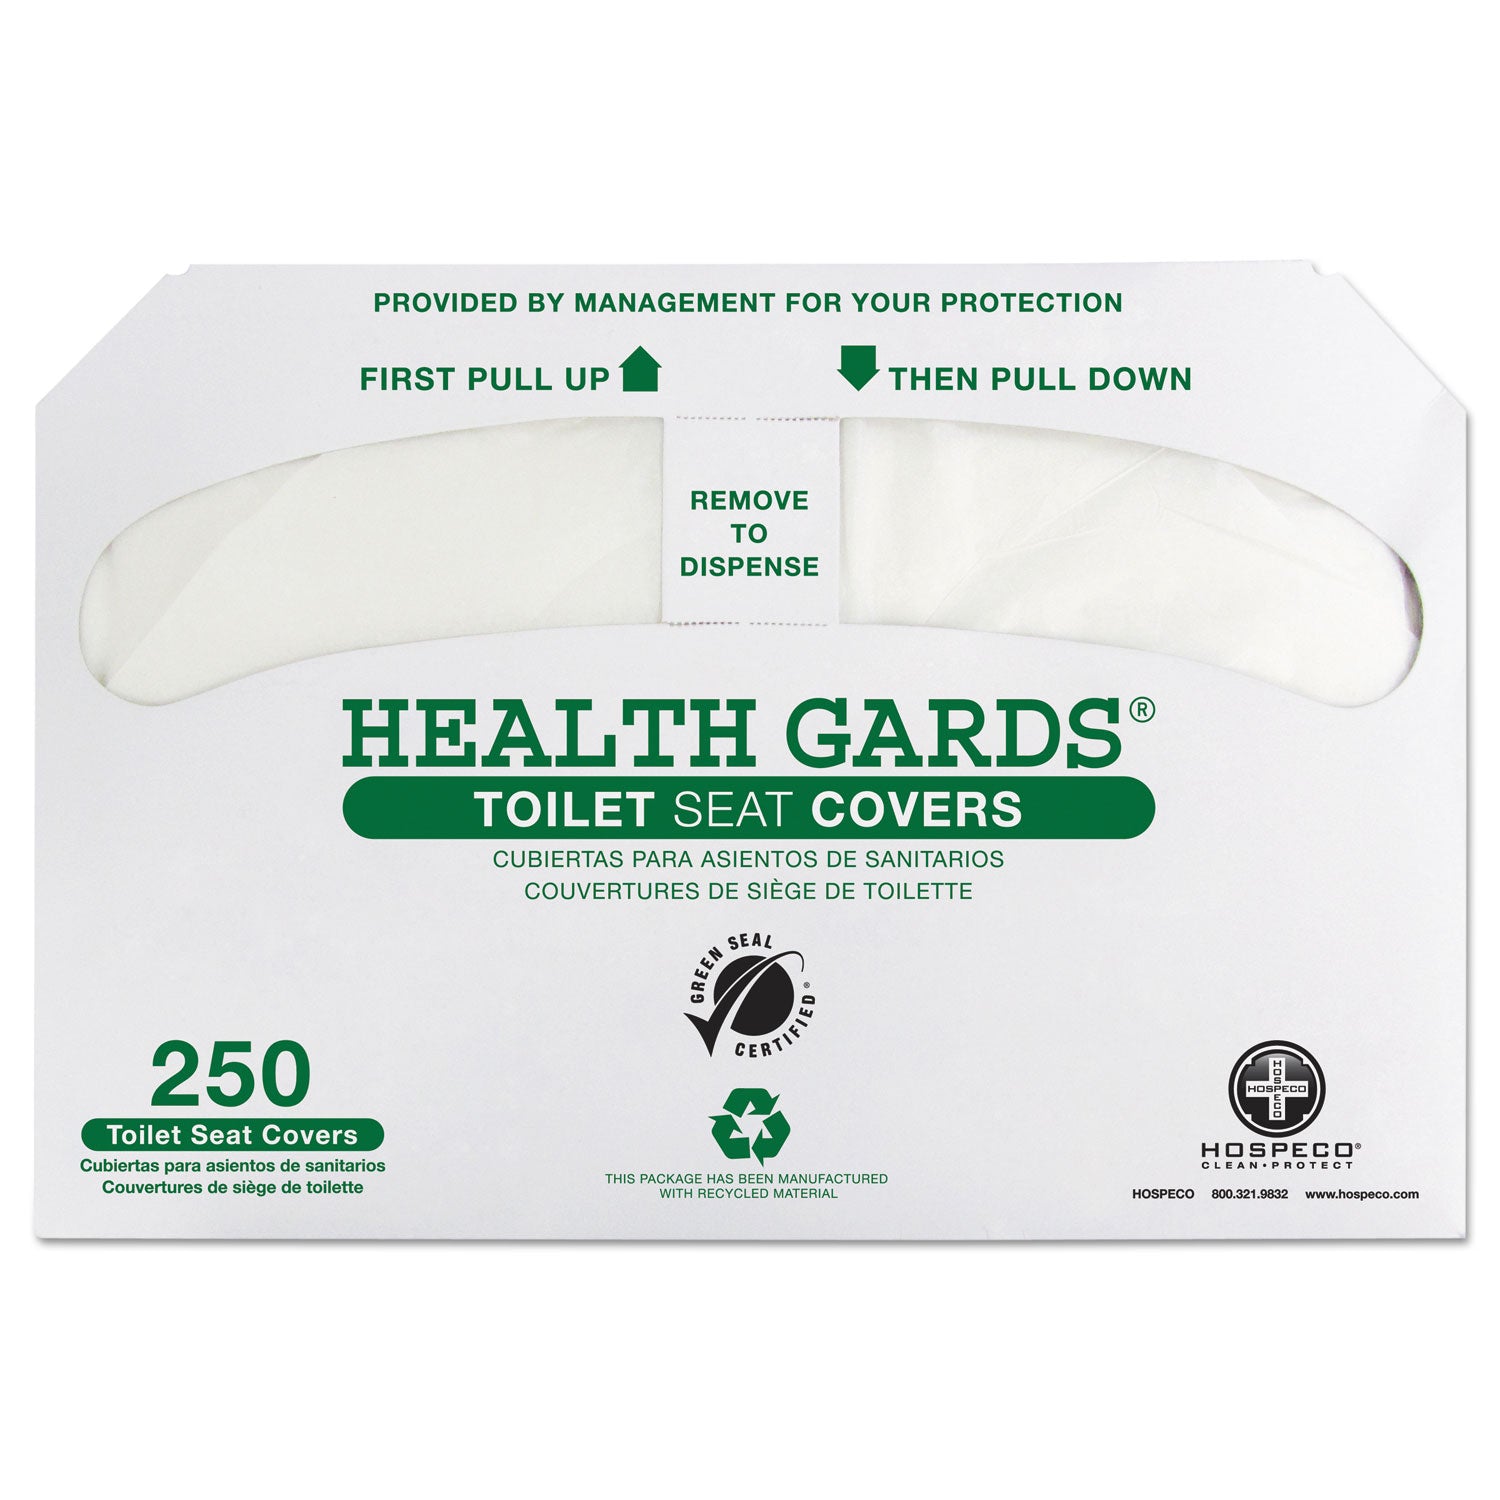 health-gards-green-seal-recycled-toilet-seat-covers-1425-x-1675-white-250-pack-4-packs-carton_hosgreen1000 - 1